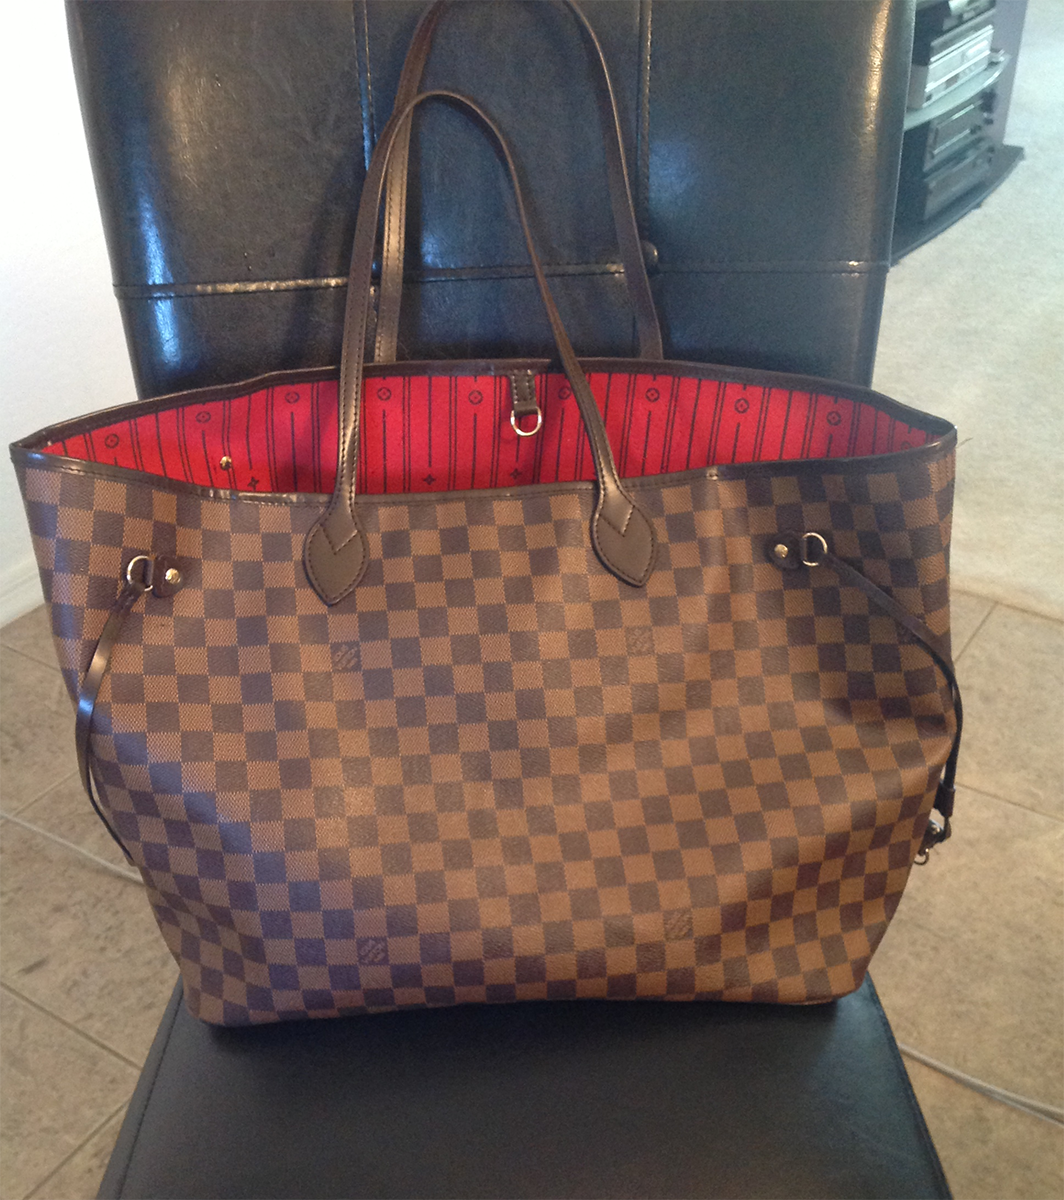 Purse Princess: Replica Louis Vuitton Neverfull GM from Bevan of Luxury7Star